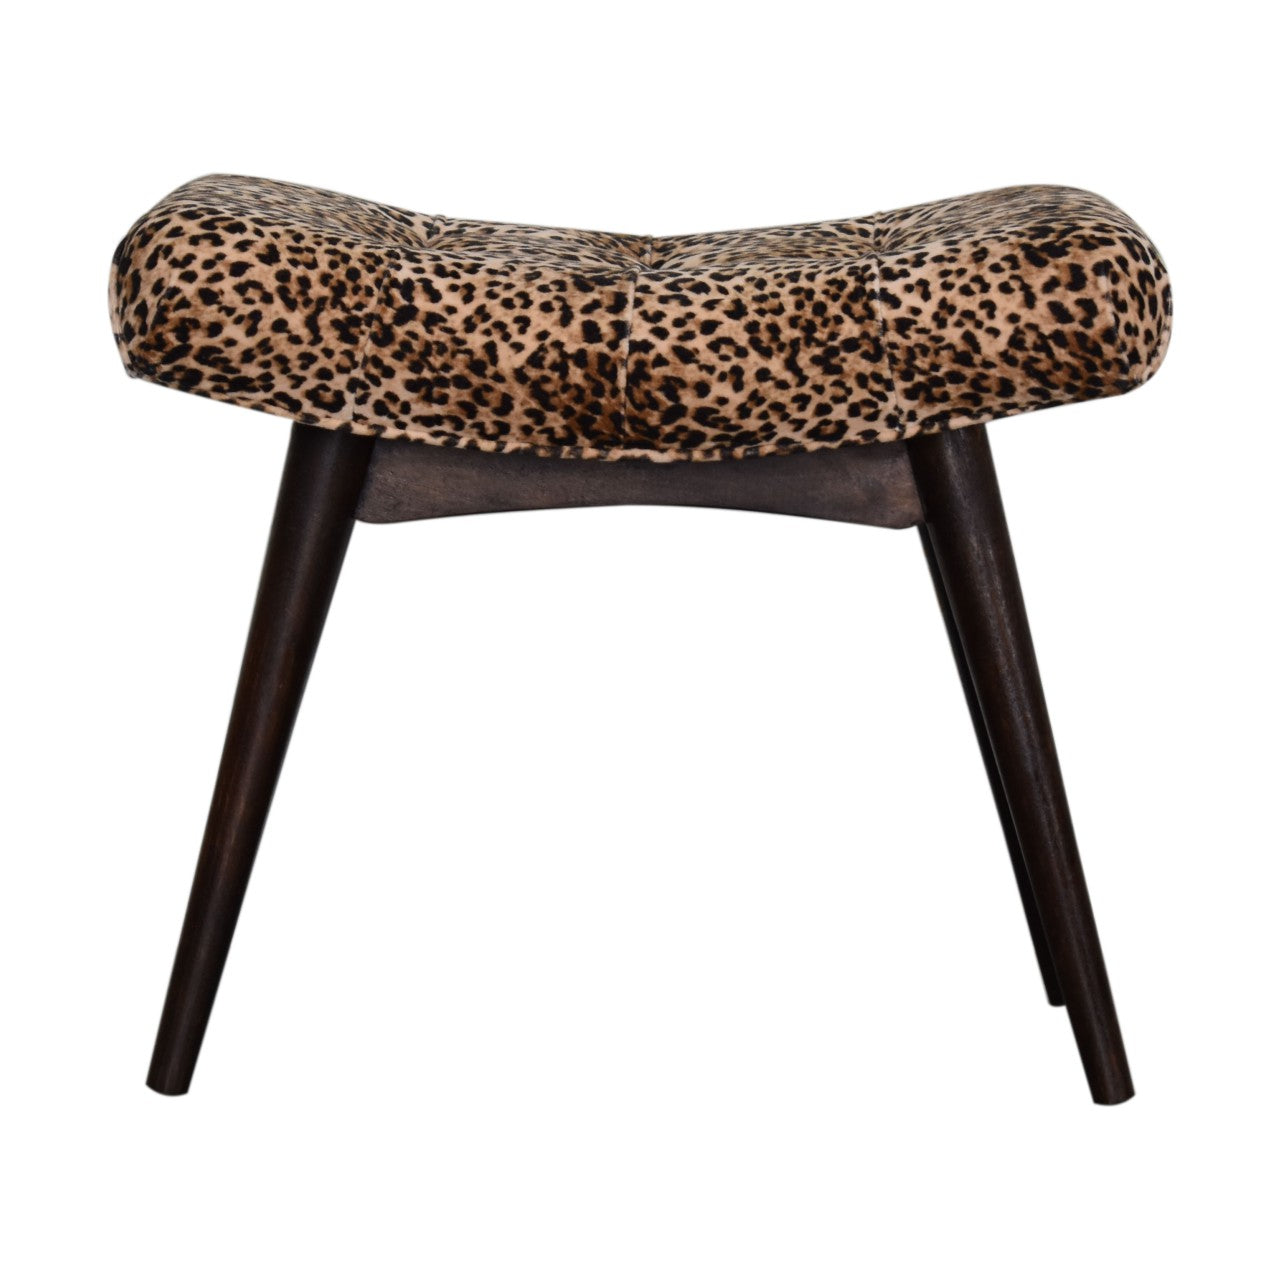 Artisan Leopard Print Curved Wooden Bench